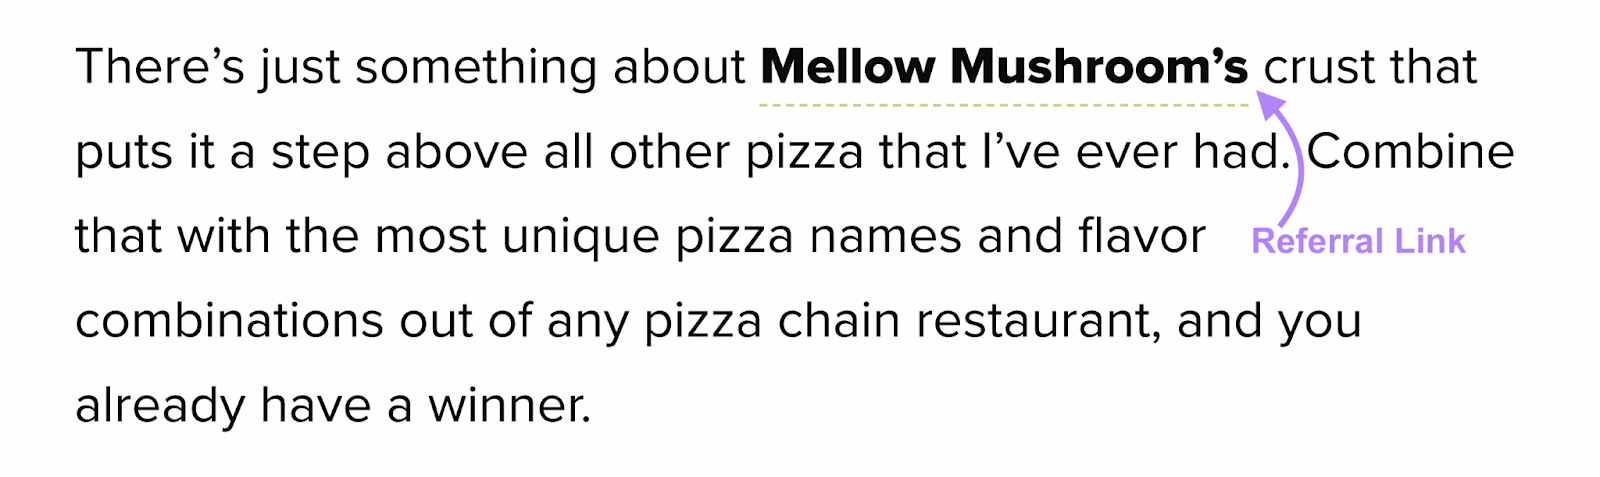 A referral link in the above blog to "Mellow Mushroom"